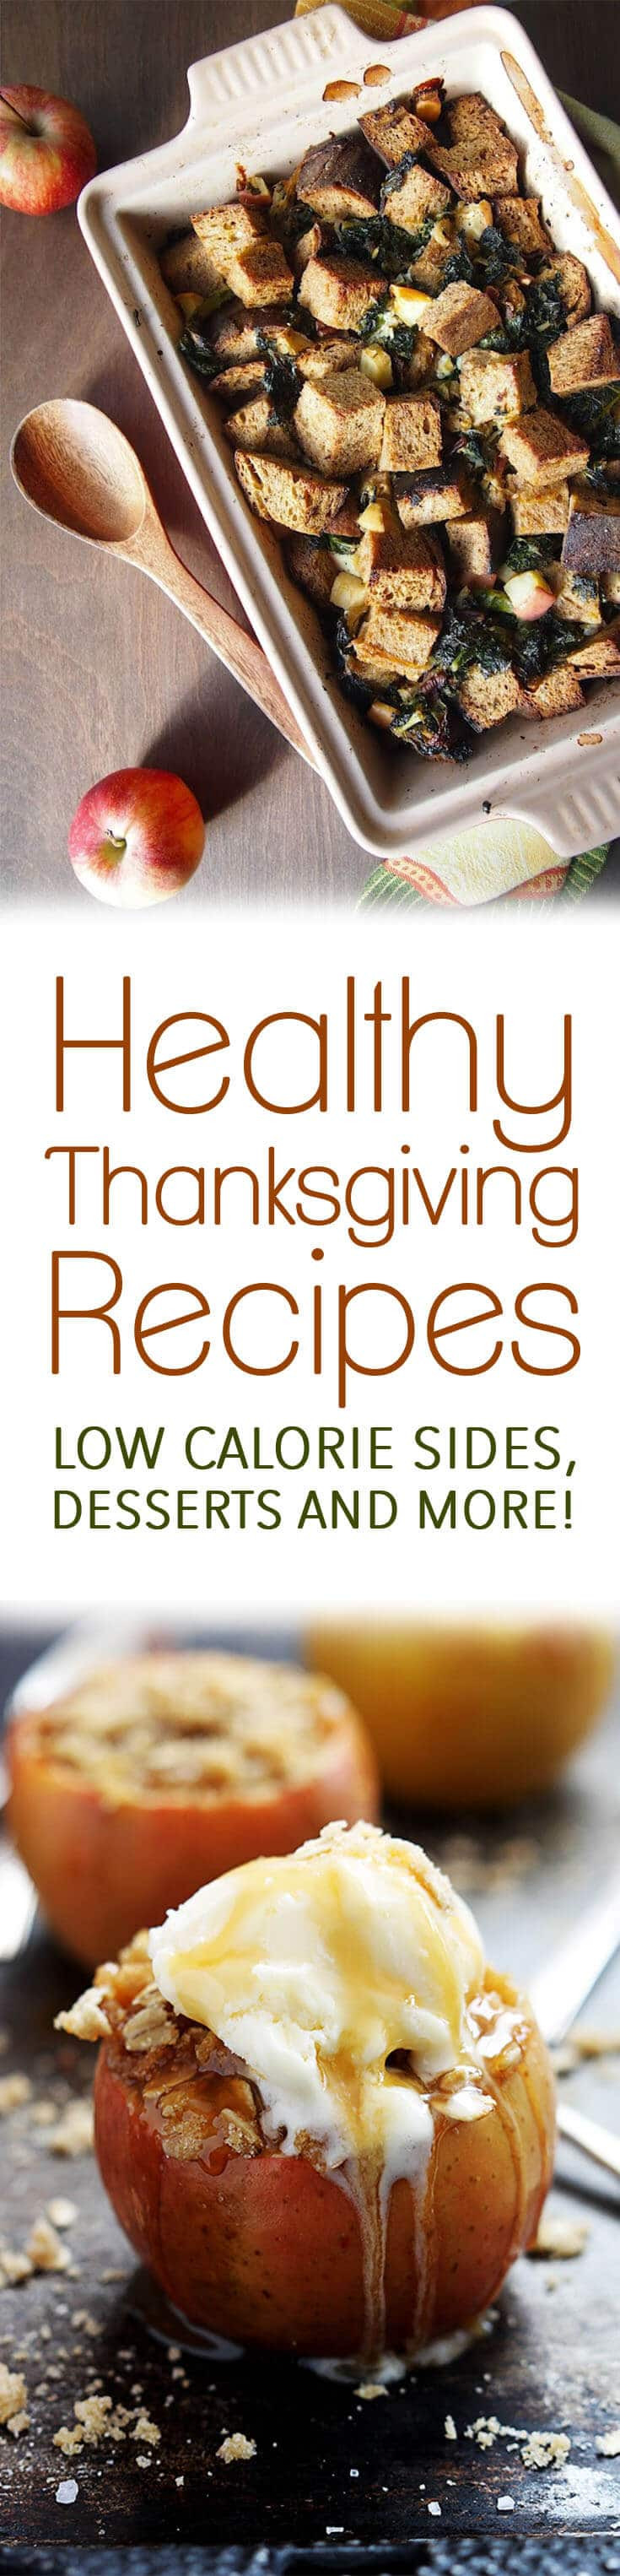 Low Calorie Turkey Recipes
 10 Best Healthy Thanksgiving Recipes for Low Calorie Sides